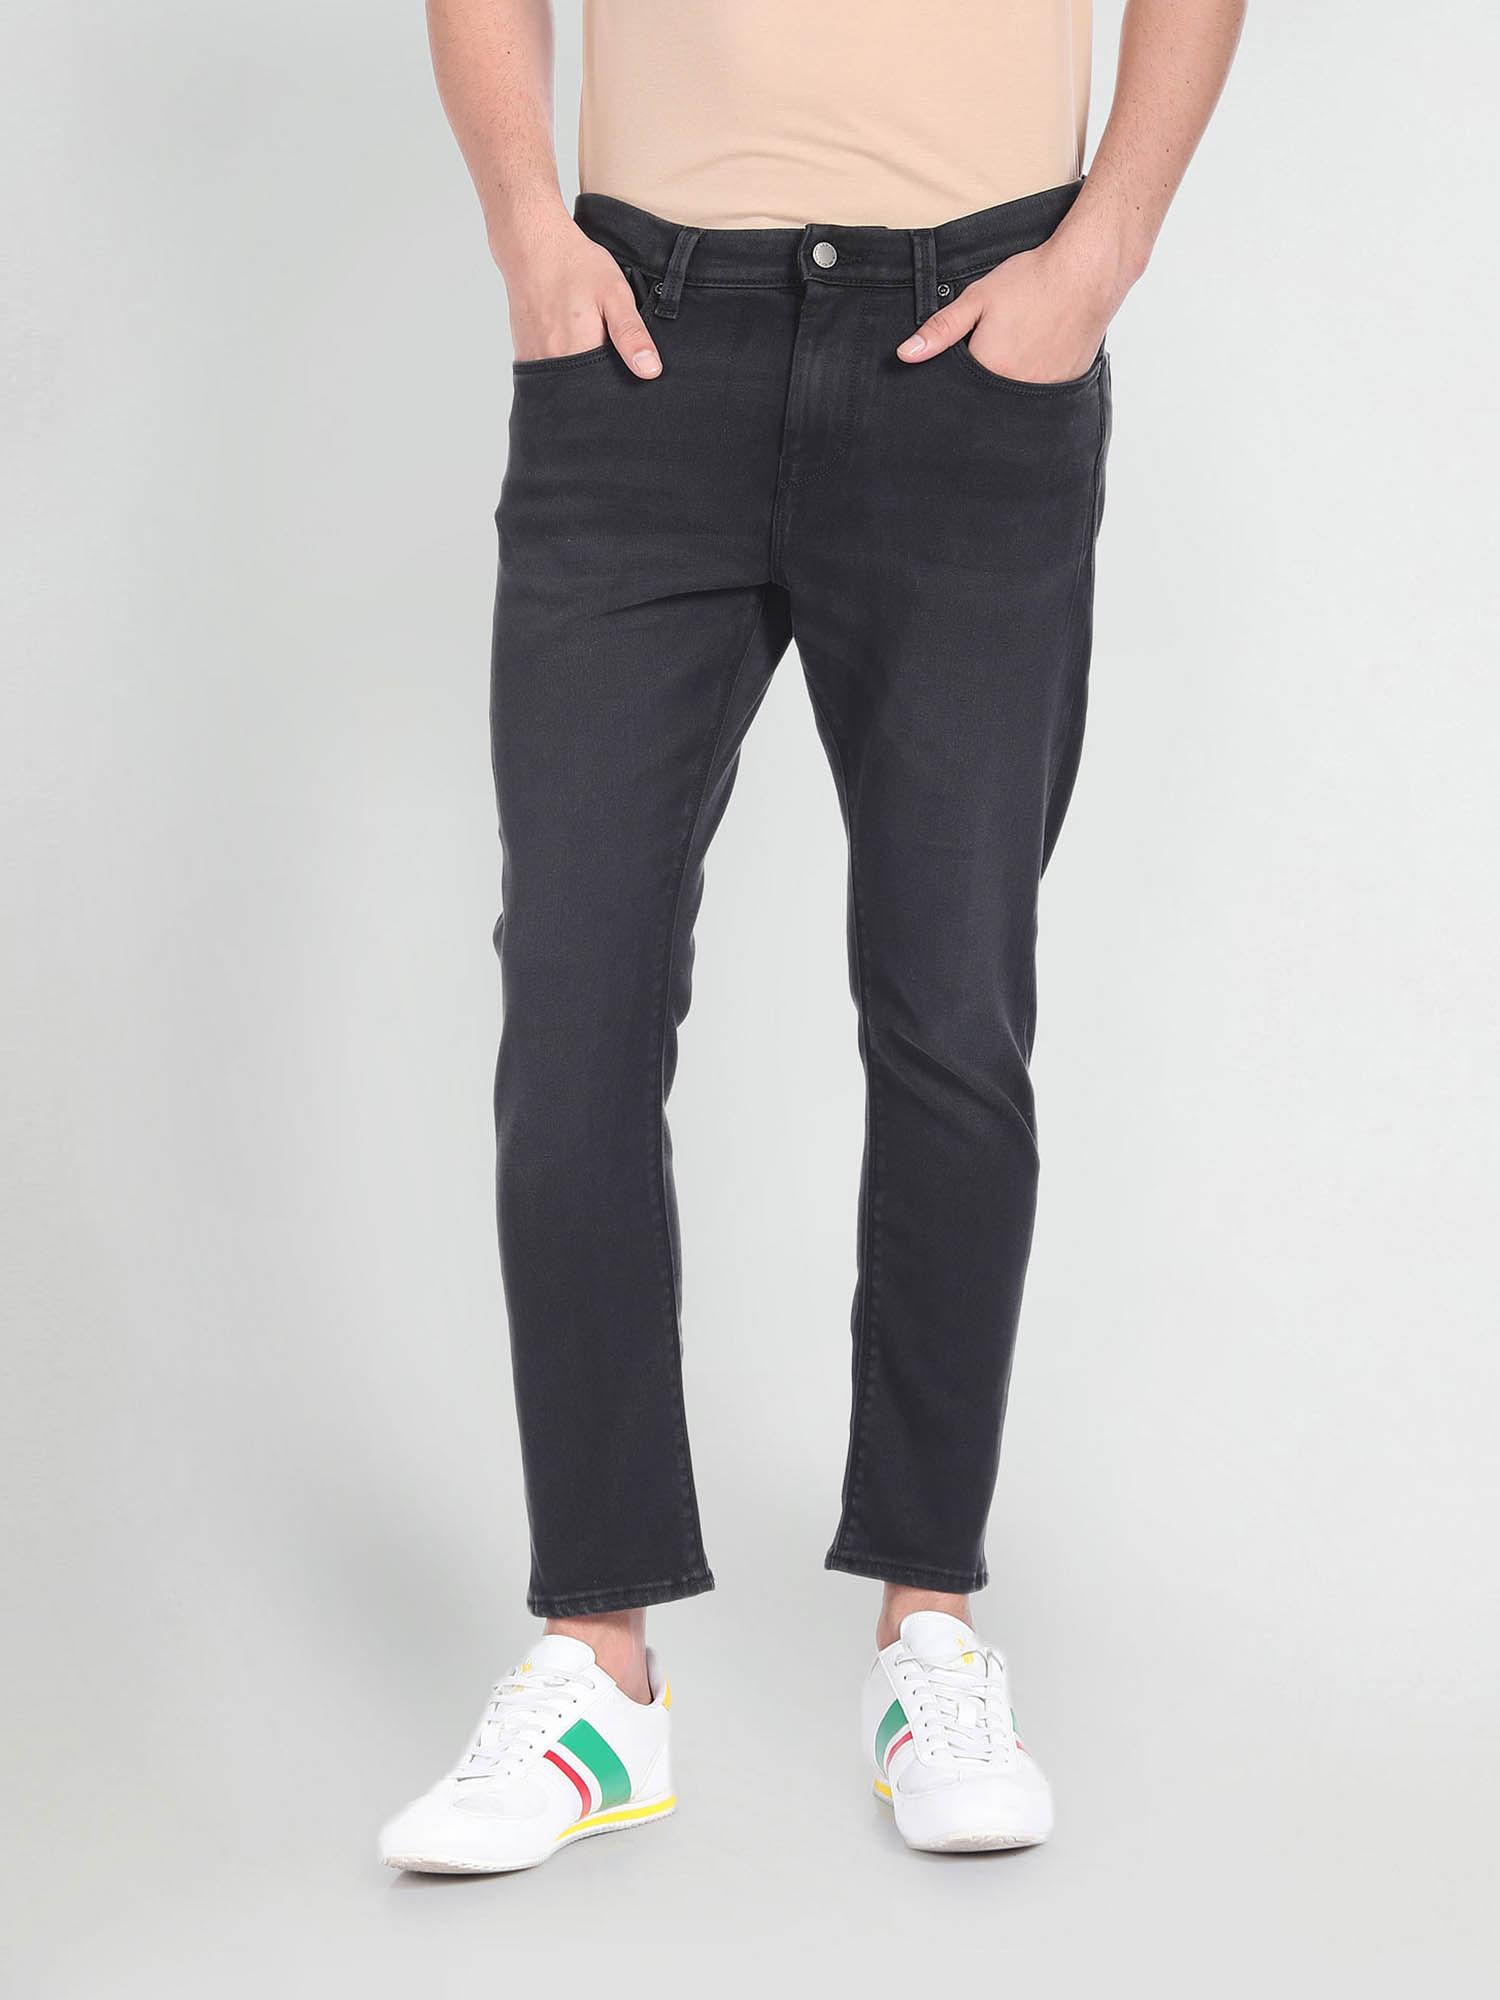 Henry Cropped Black Jeans